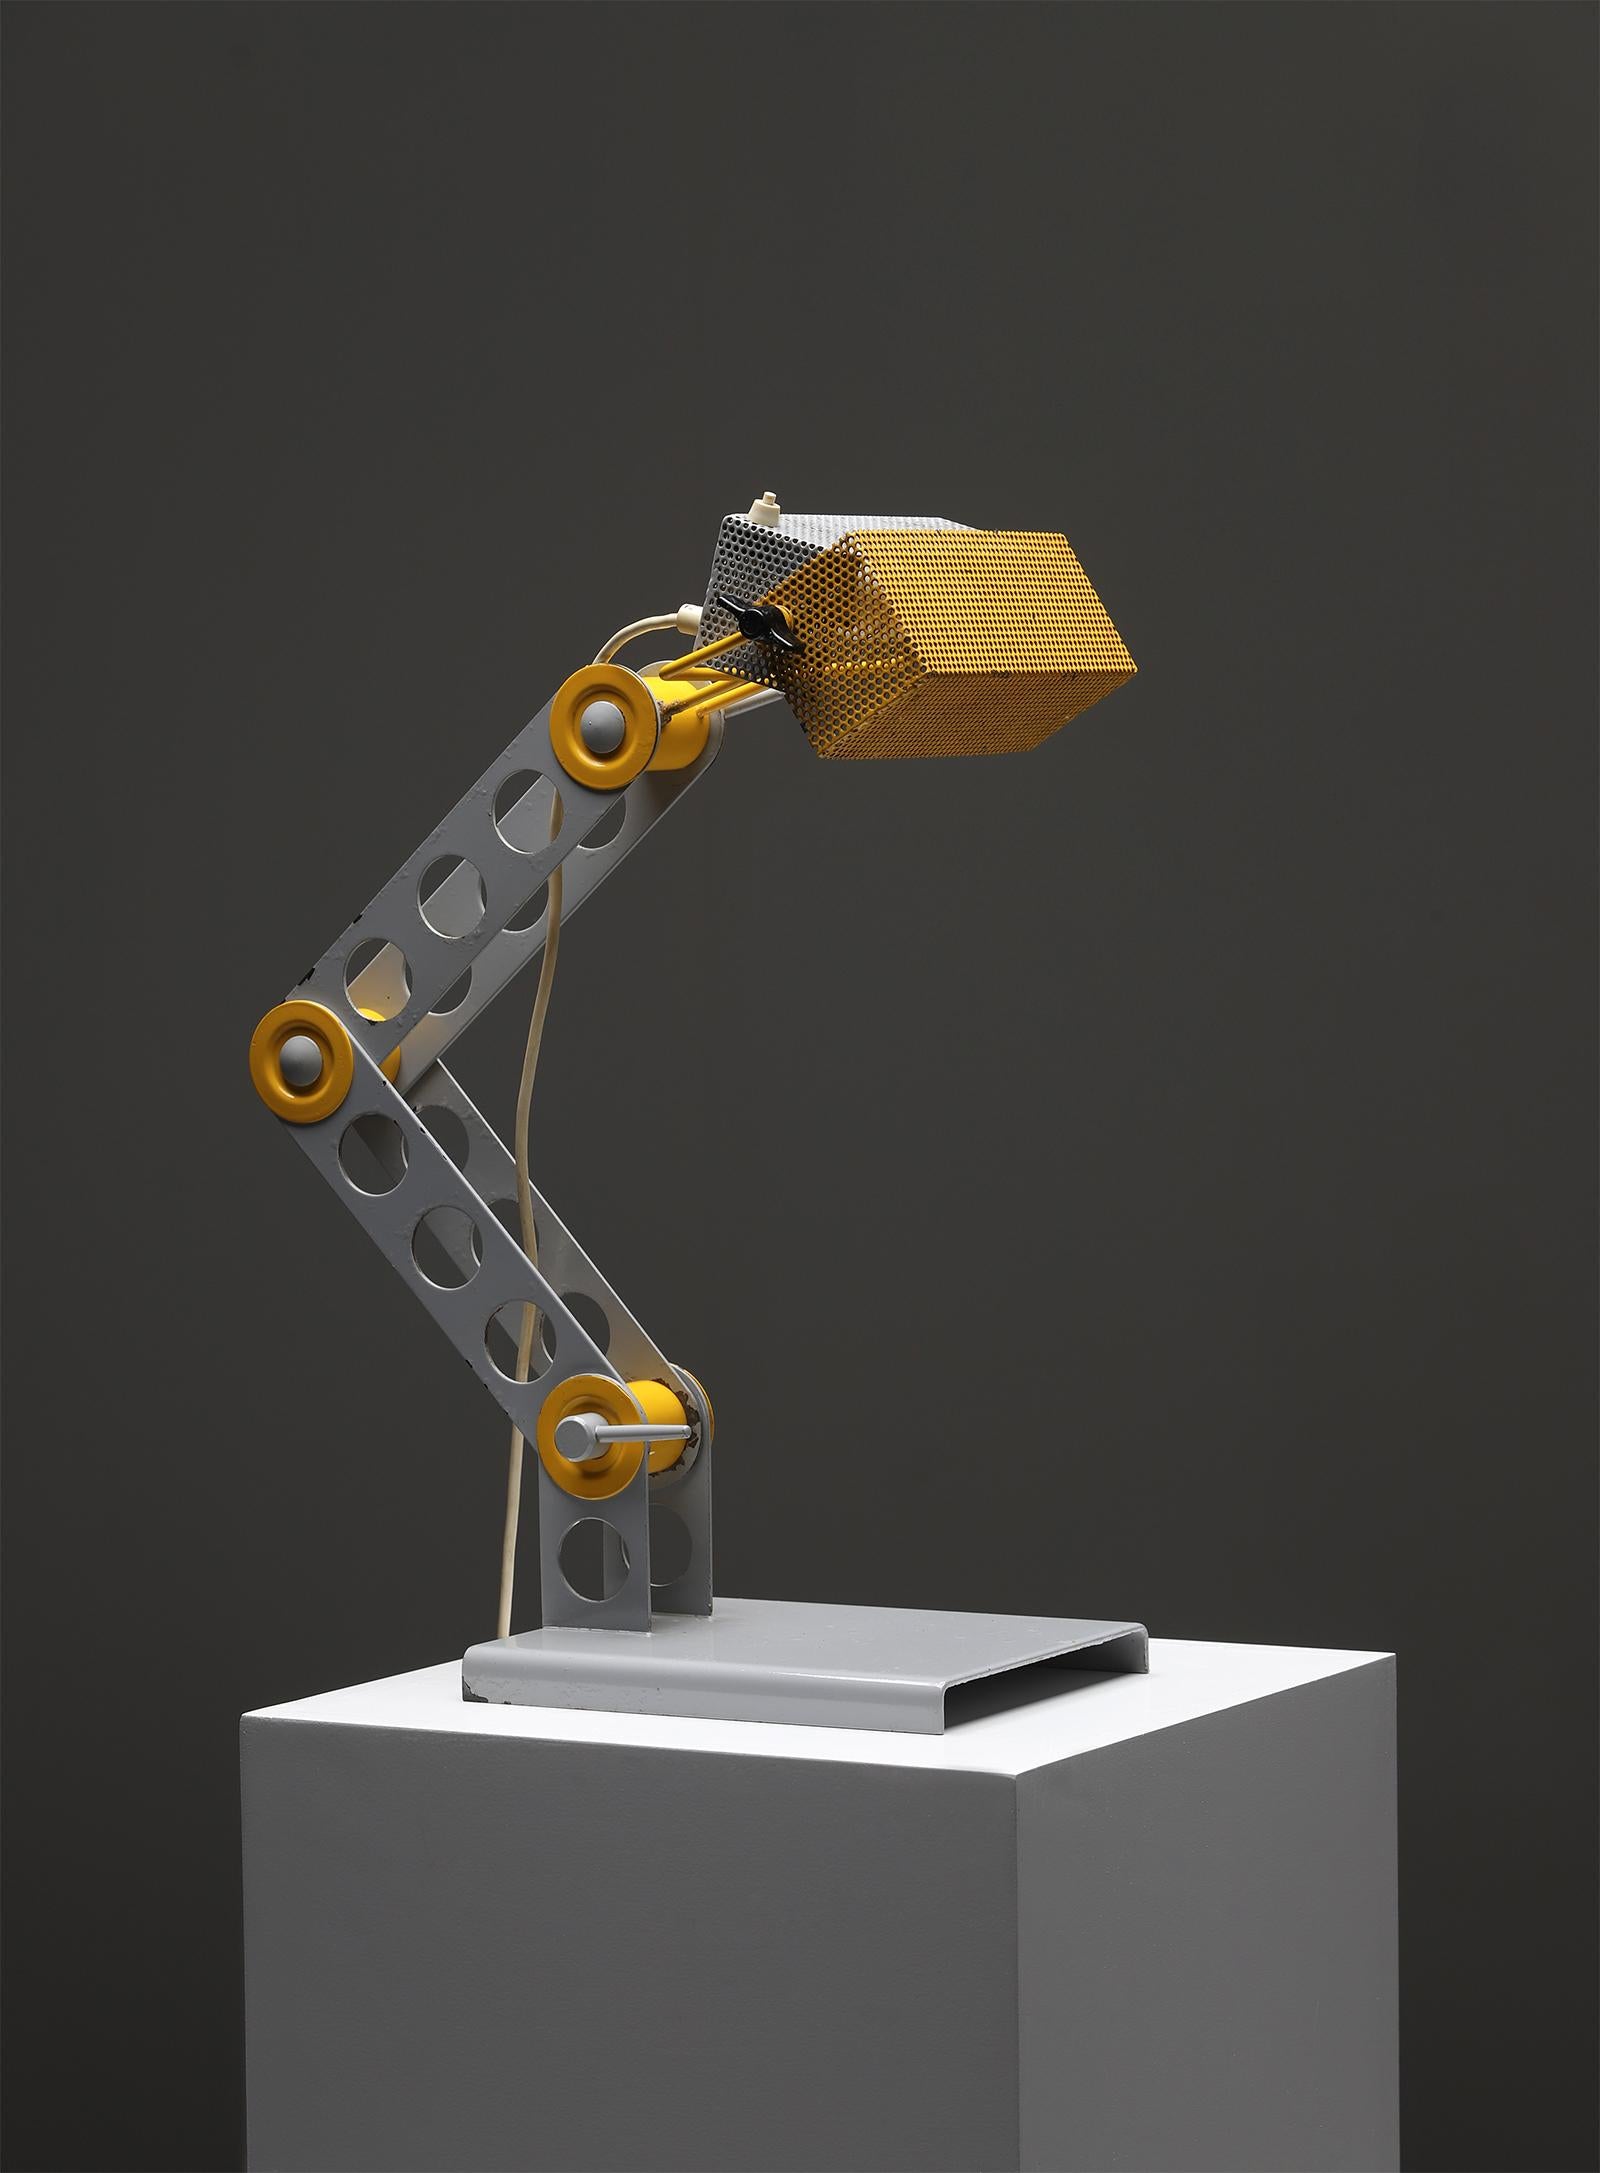 playful metal table lamp in Memphis Milano and meccano style made in Italy For Sale 8